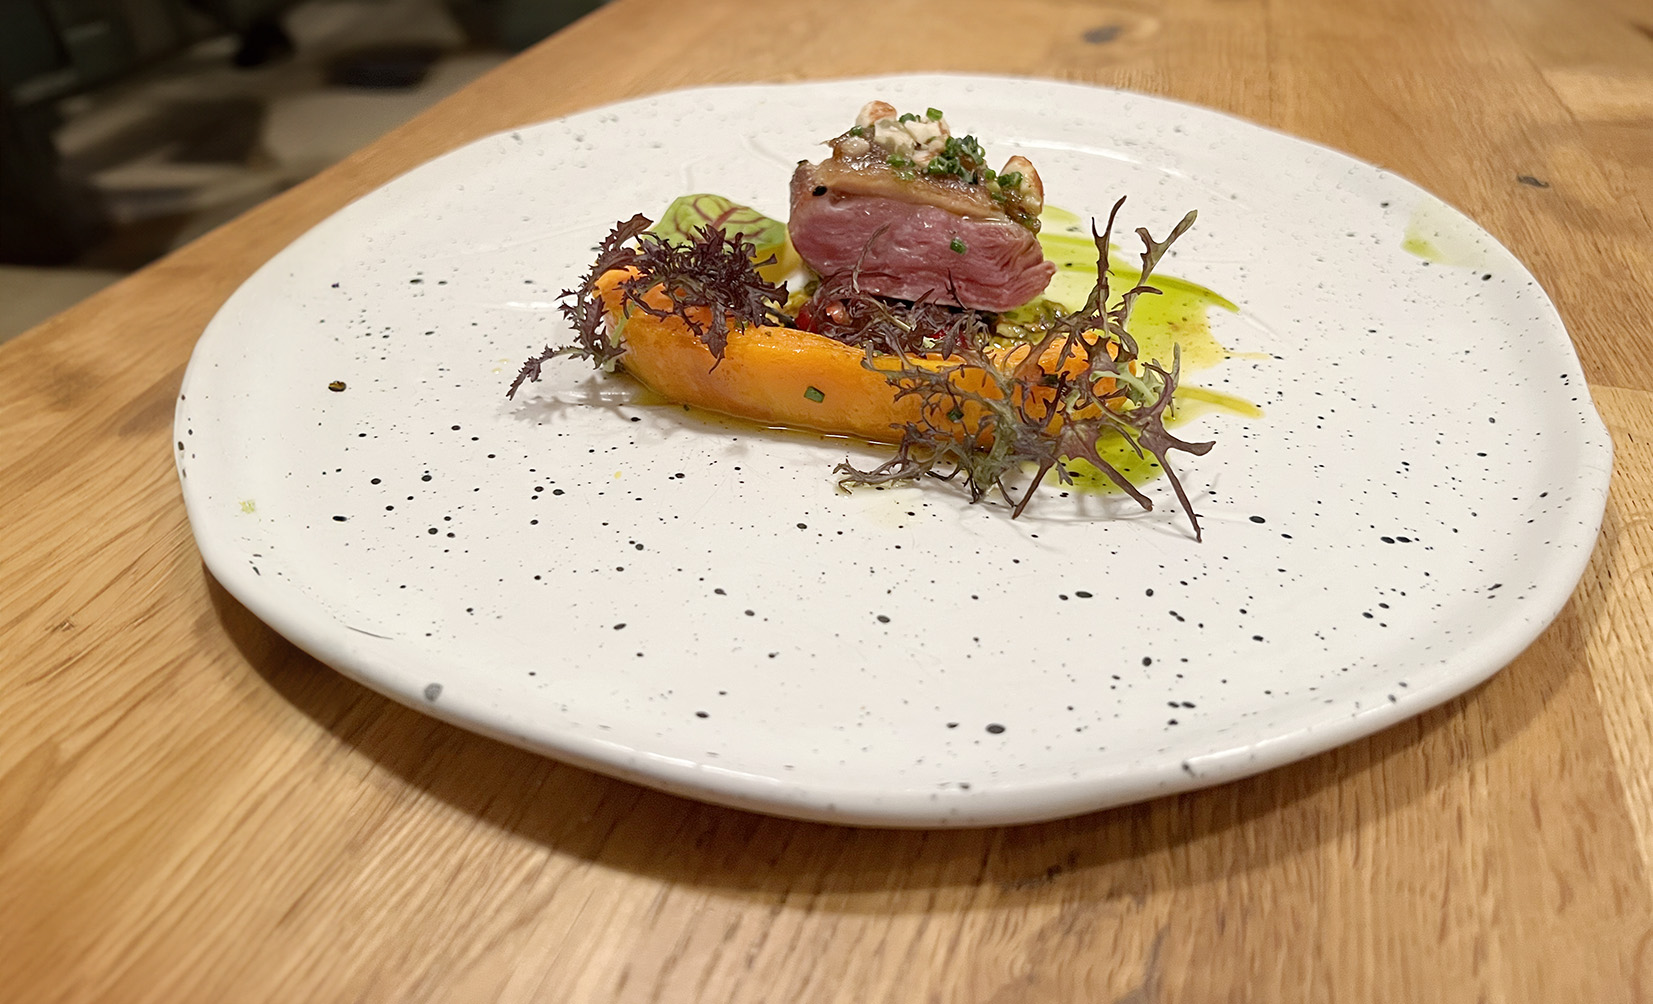 Sonoma County Duck Breast with Squash, Pistachio, Date Butter and Seeds at Kali Restaurant in Los Angeles (Photo by Julie Nguyen)